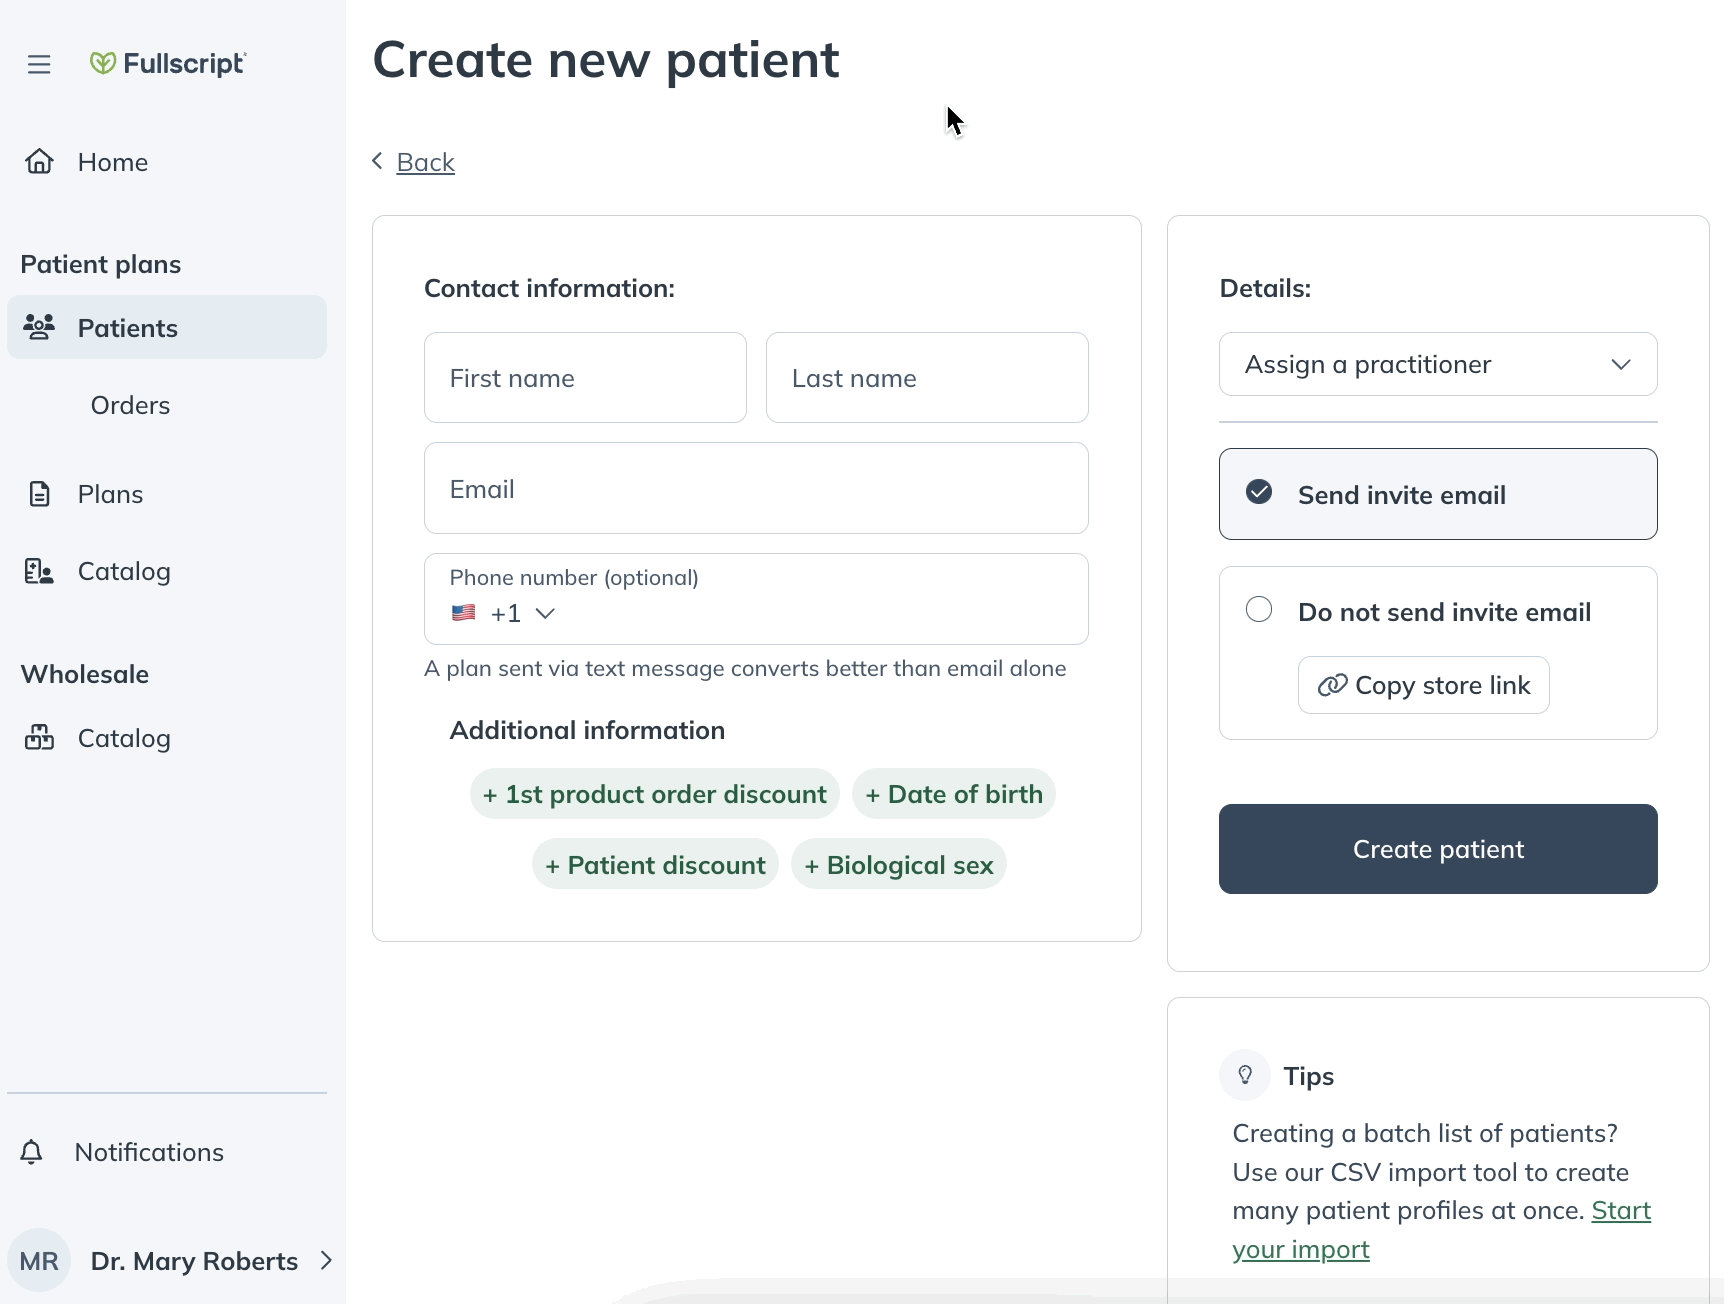 Creating a new patient and giving them an individual discount.